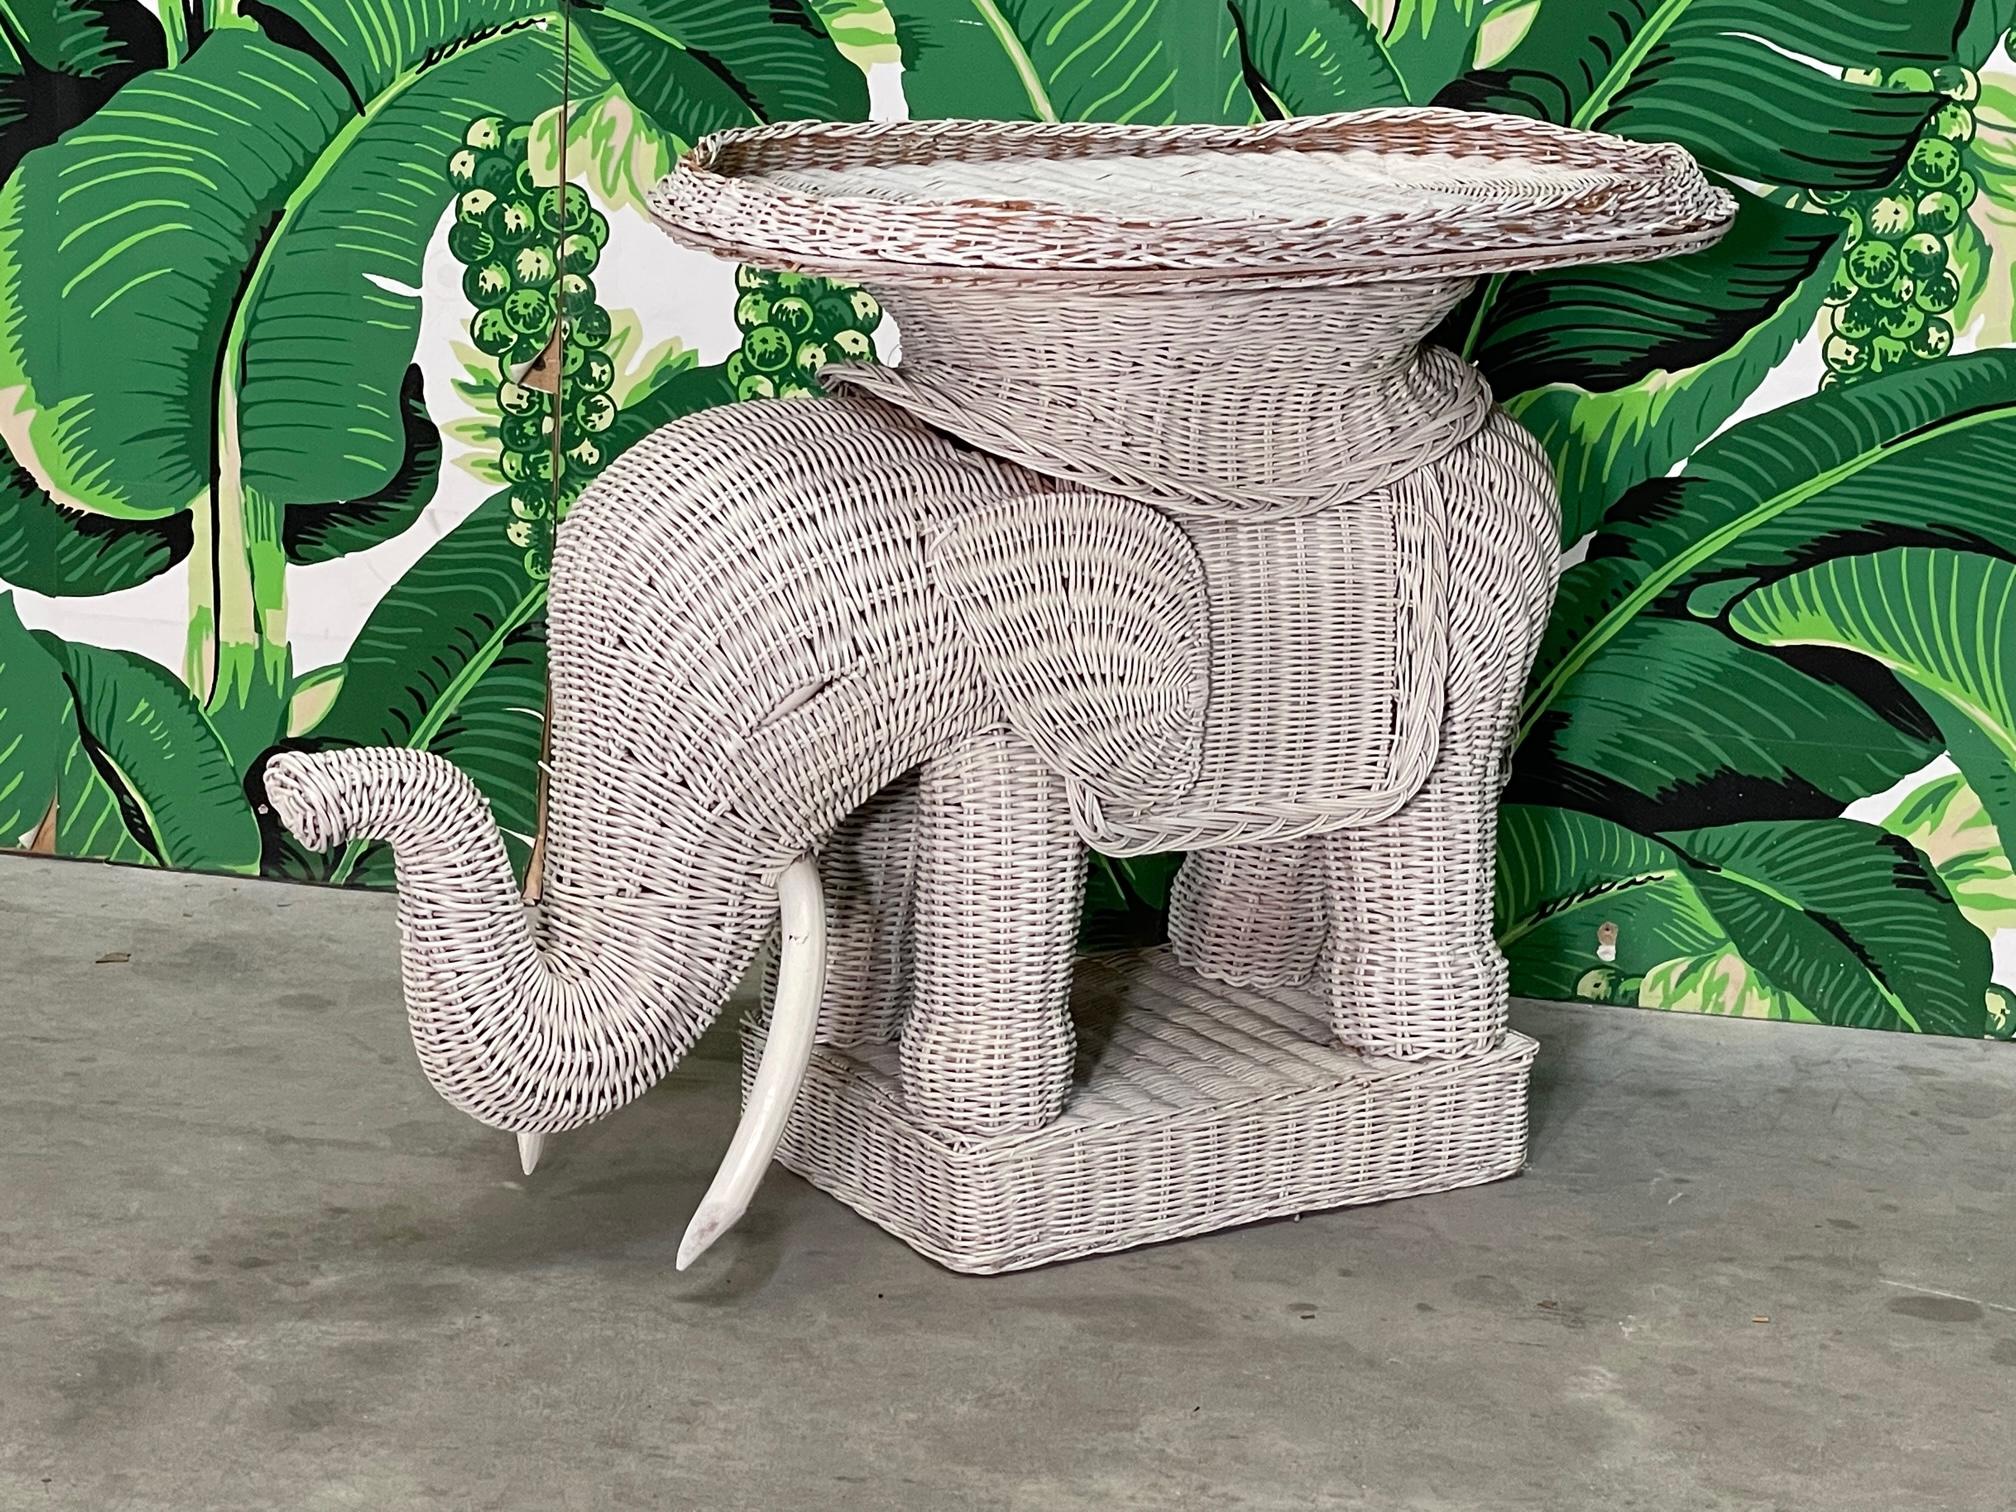 Charming wicker elephant features wooden tusks and a removable top tray. In the style of Mario Lopez Torres. Can be used as an end table or remove the tray to exhibit a wicker version of a garden seat/stool. Good condition with imperfections